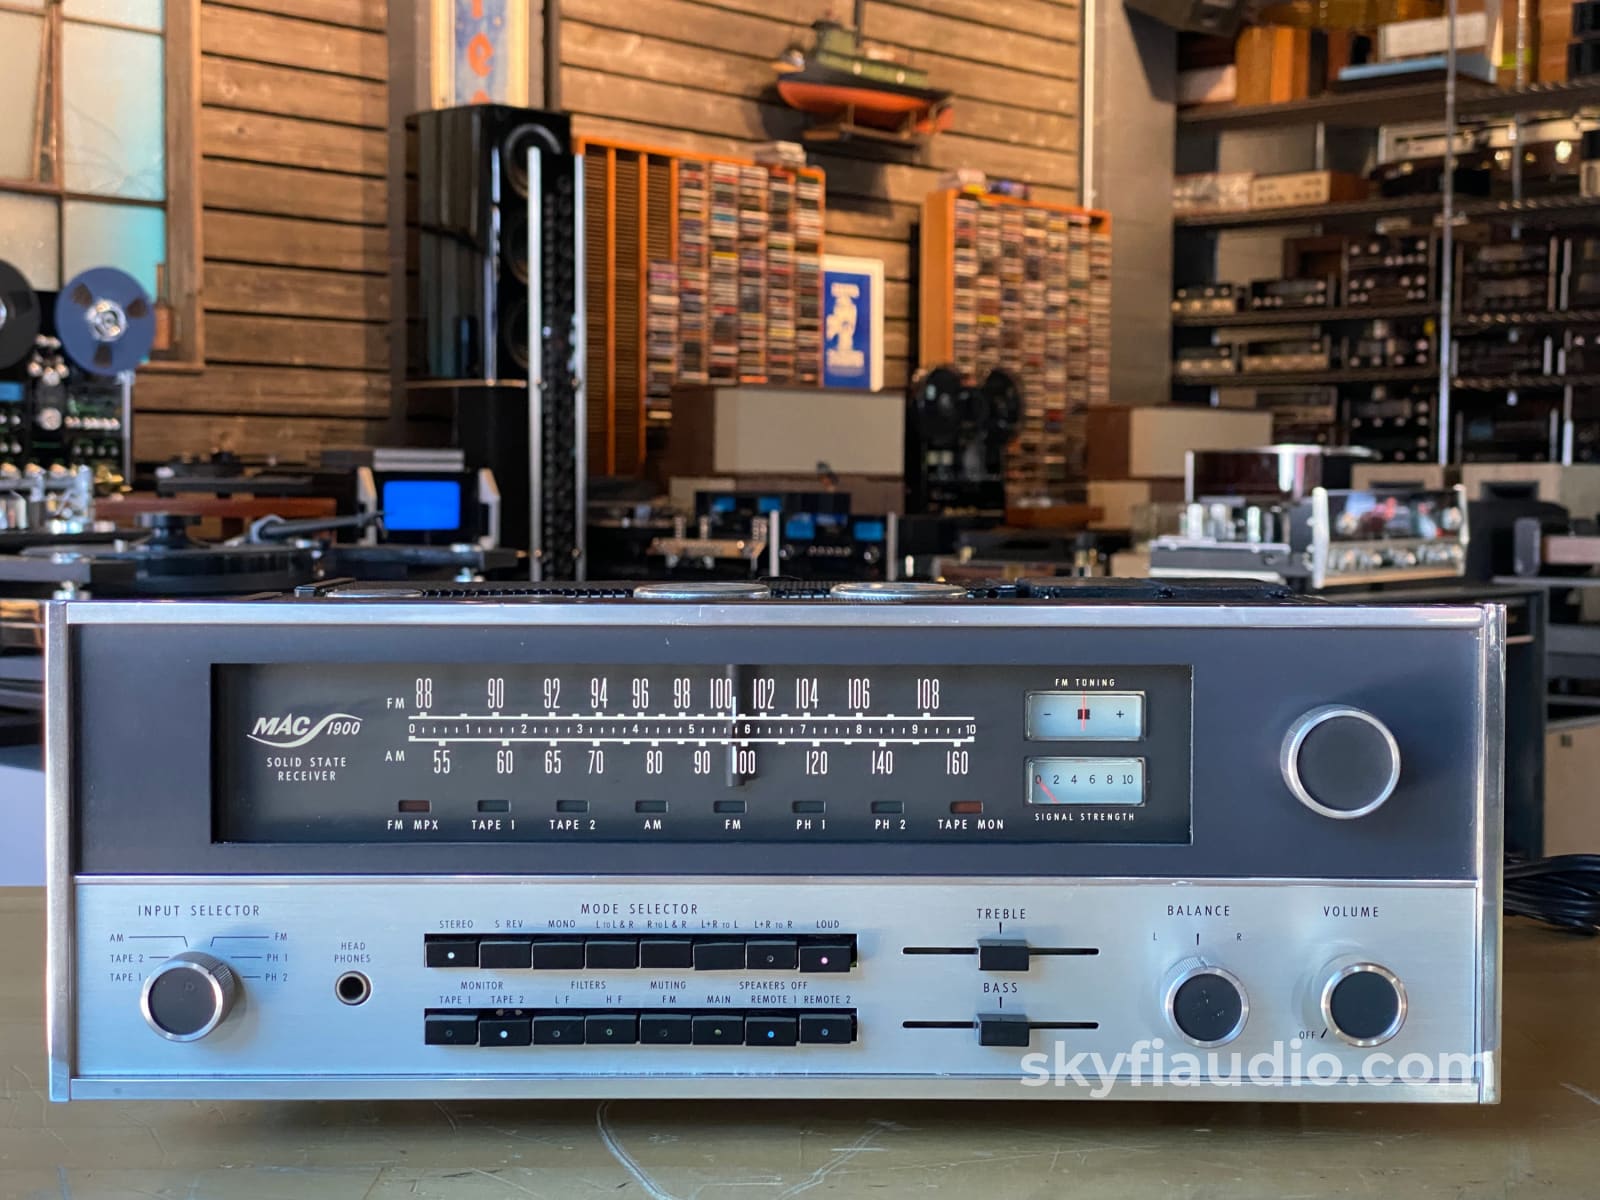 Mcintosh Mac1900 The Original High-End Stereo Receiver - Serviced Integrated Amplifier